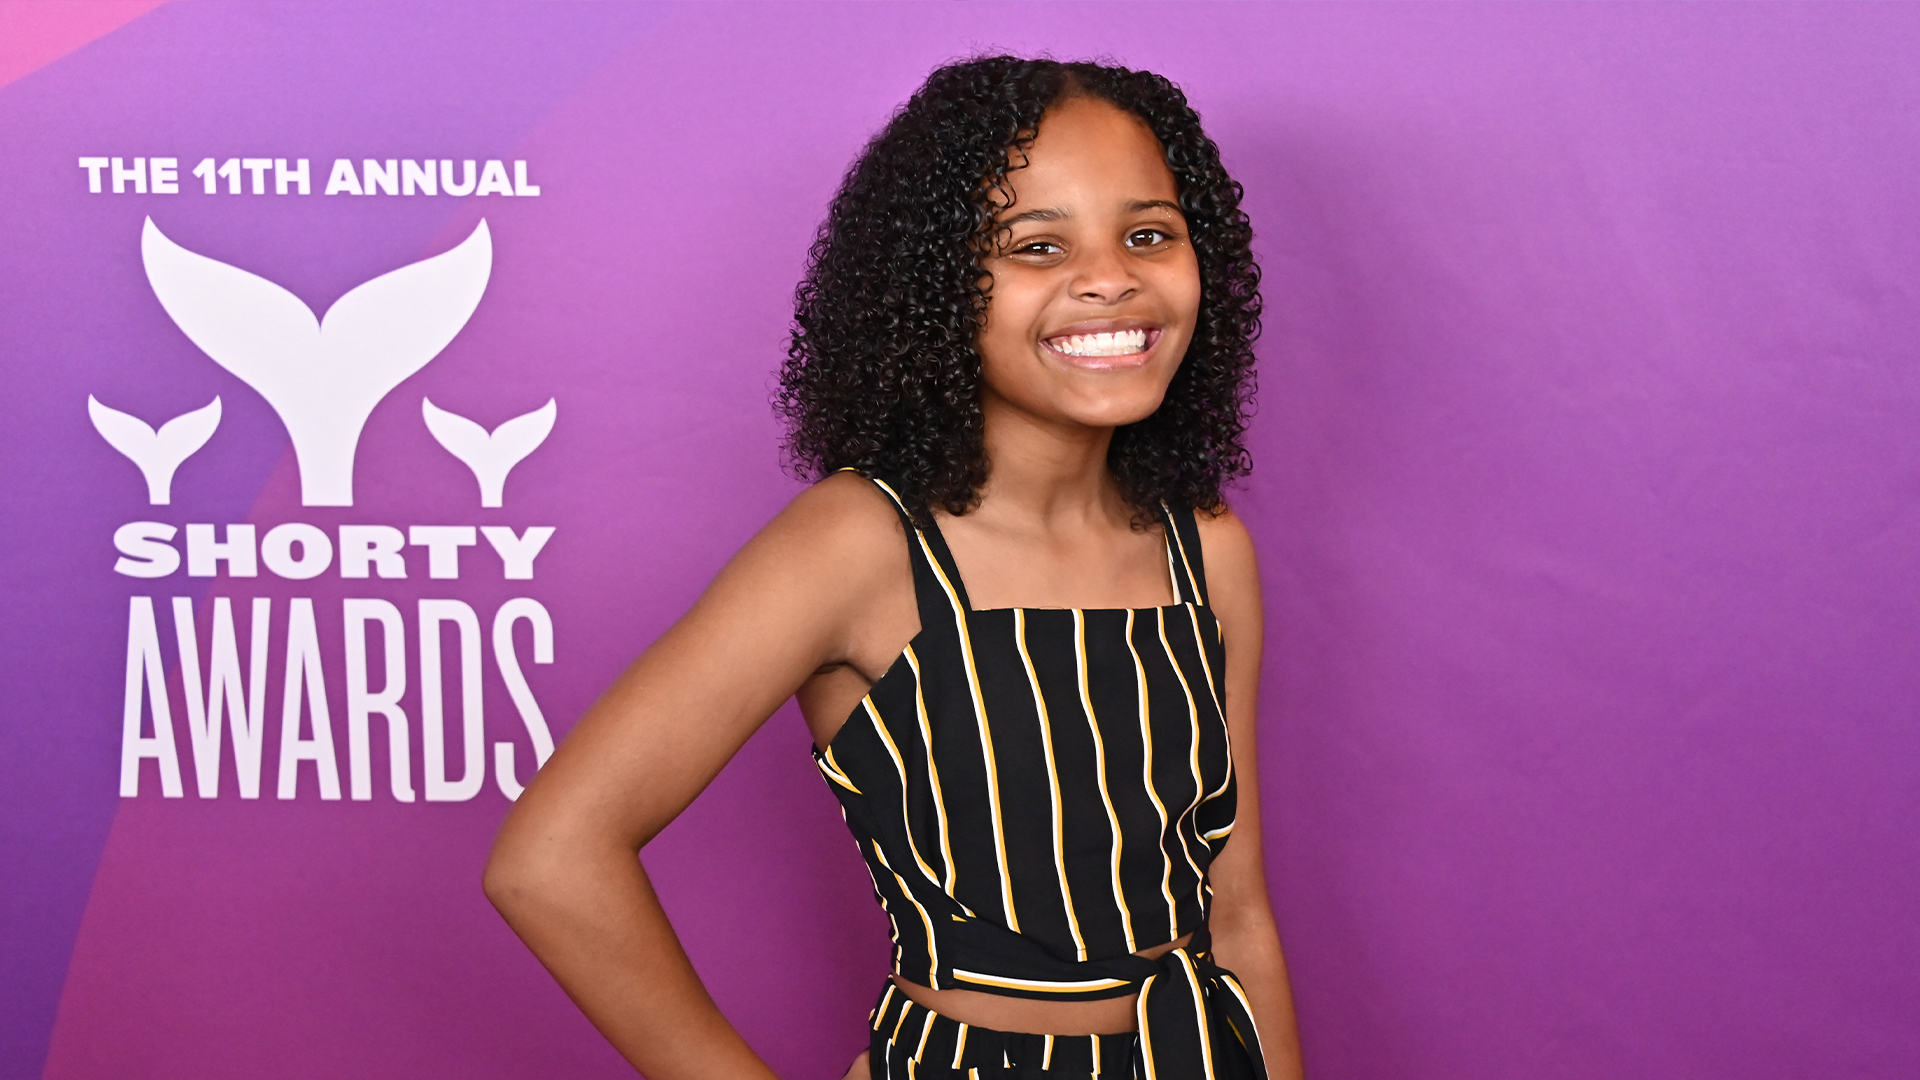 Little Miss Flint Mari Copeny To Be Honored With The Changemaker Award At The 2022 Billboard Music Awards